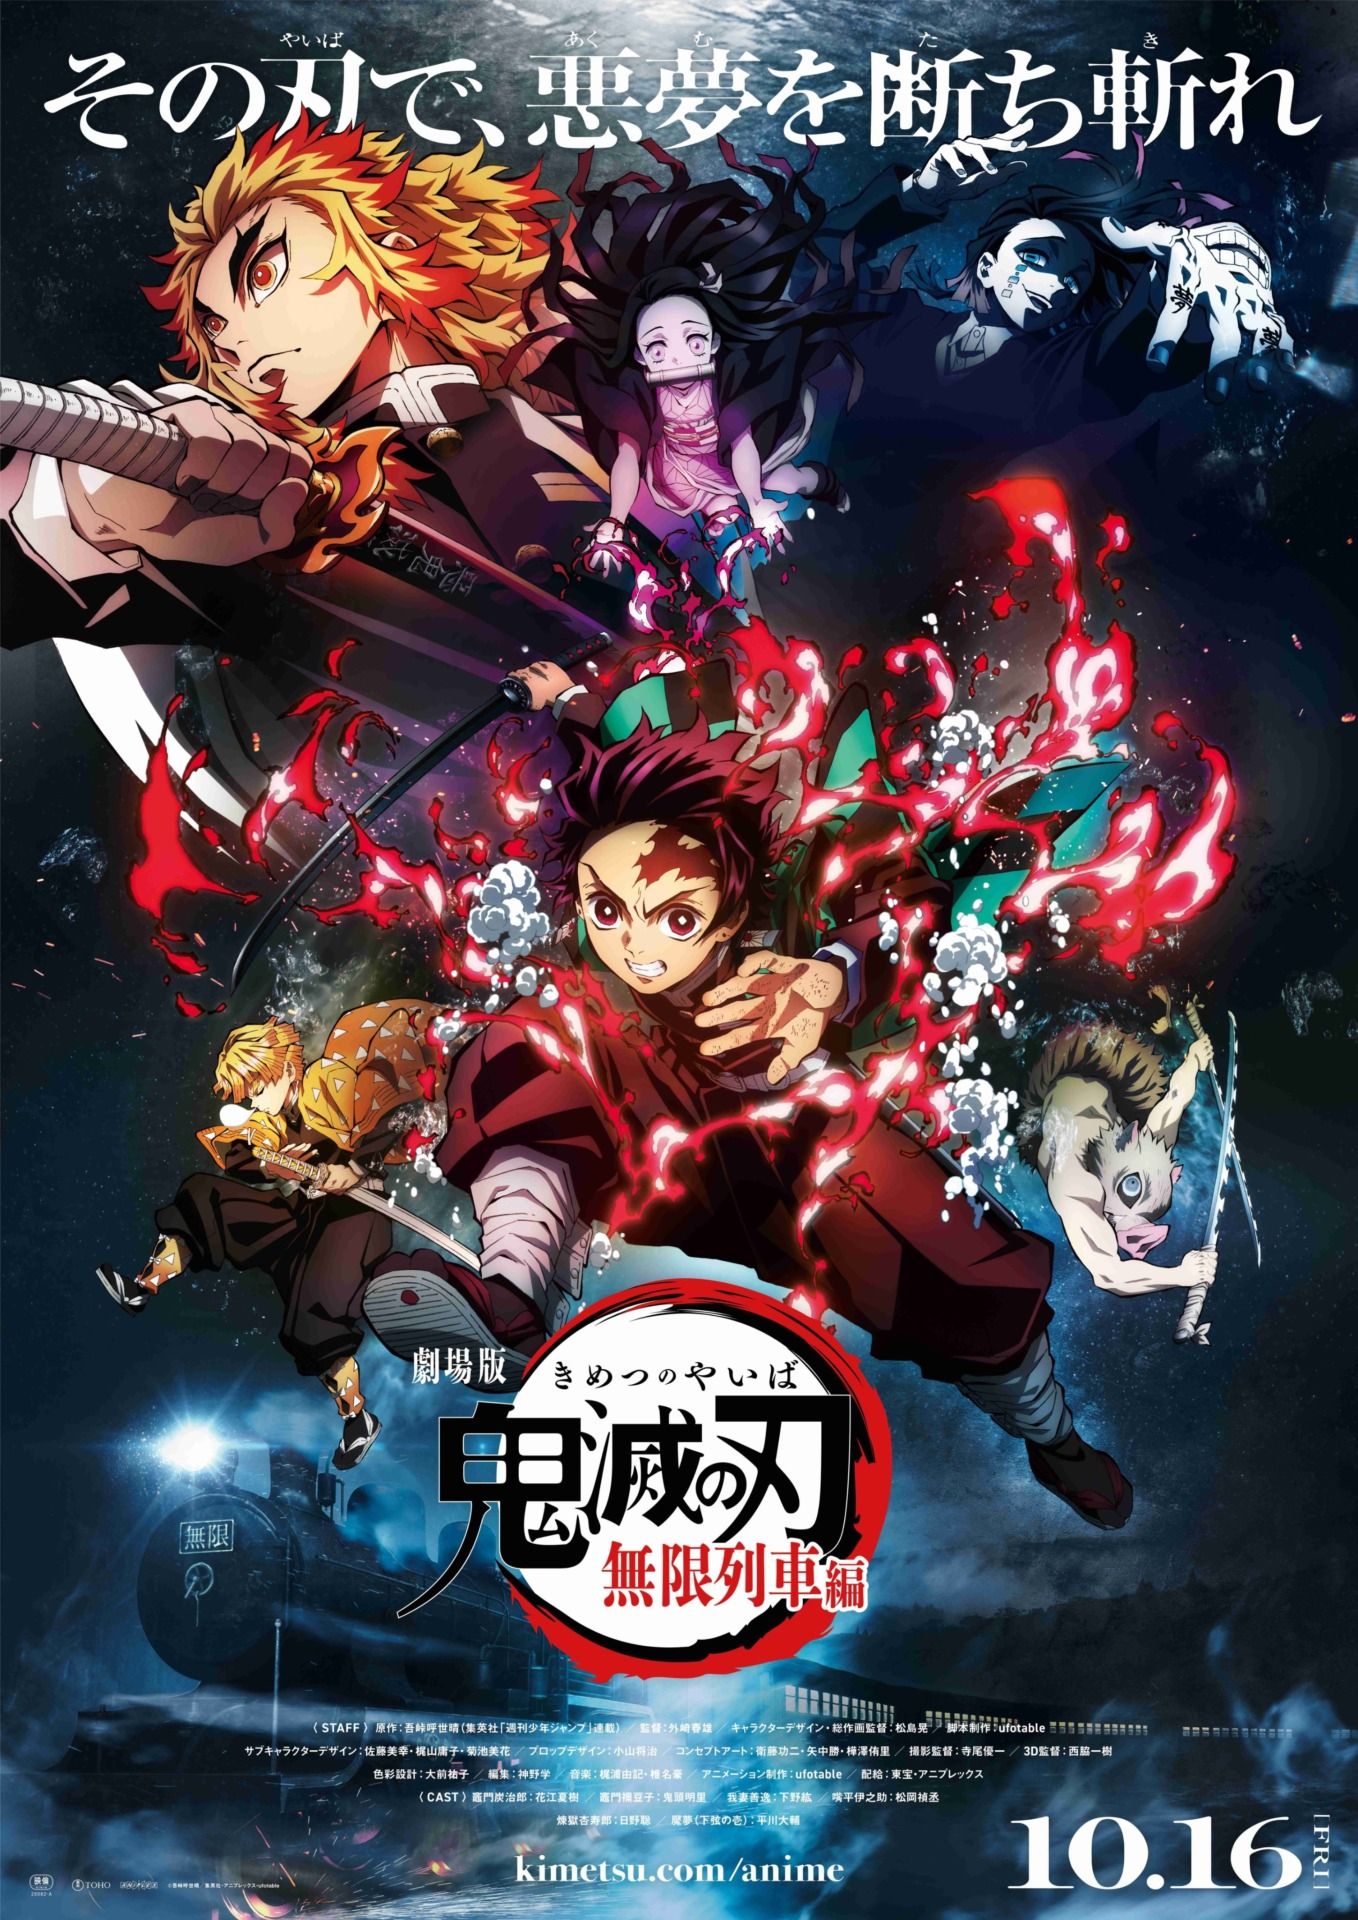 The Japanese Demon Slayer Movie Release Date Is October 2020